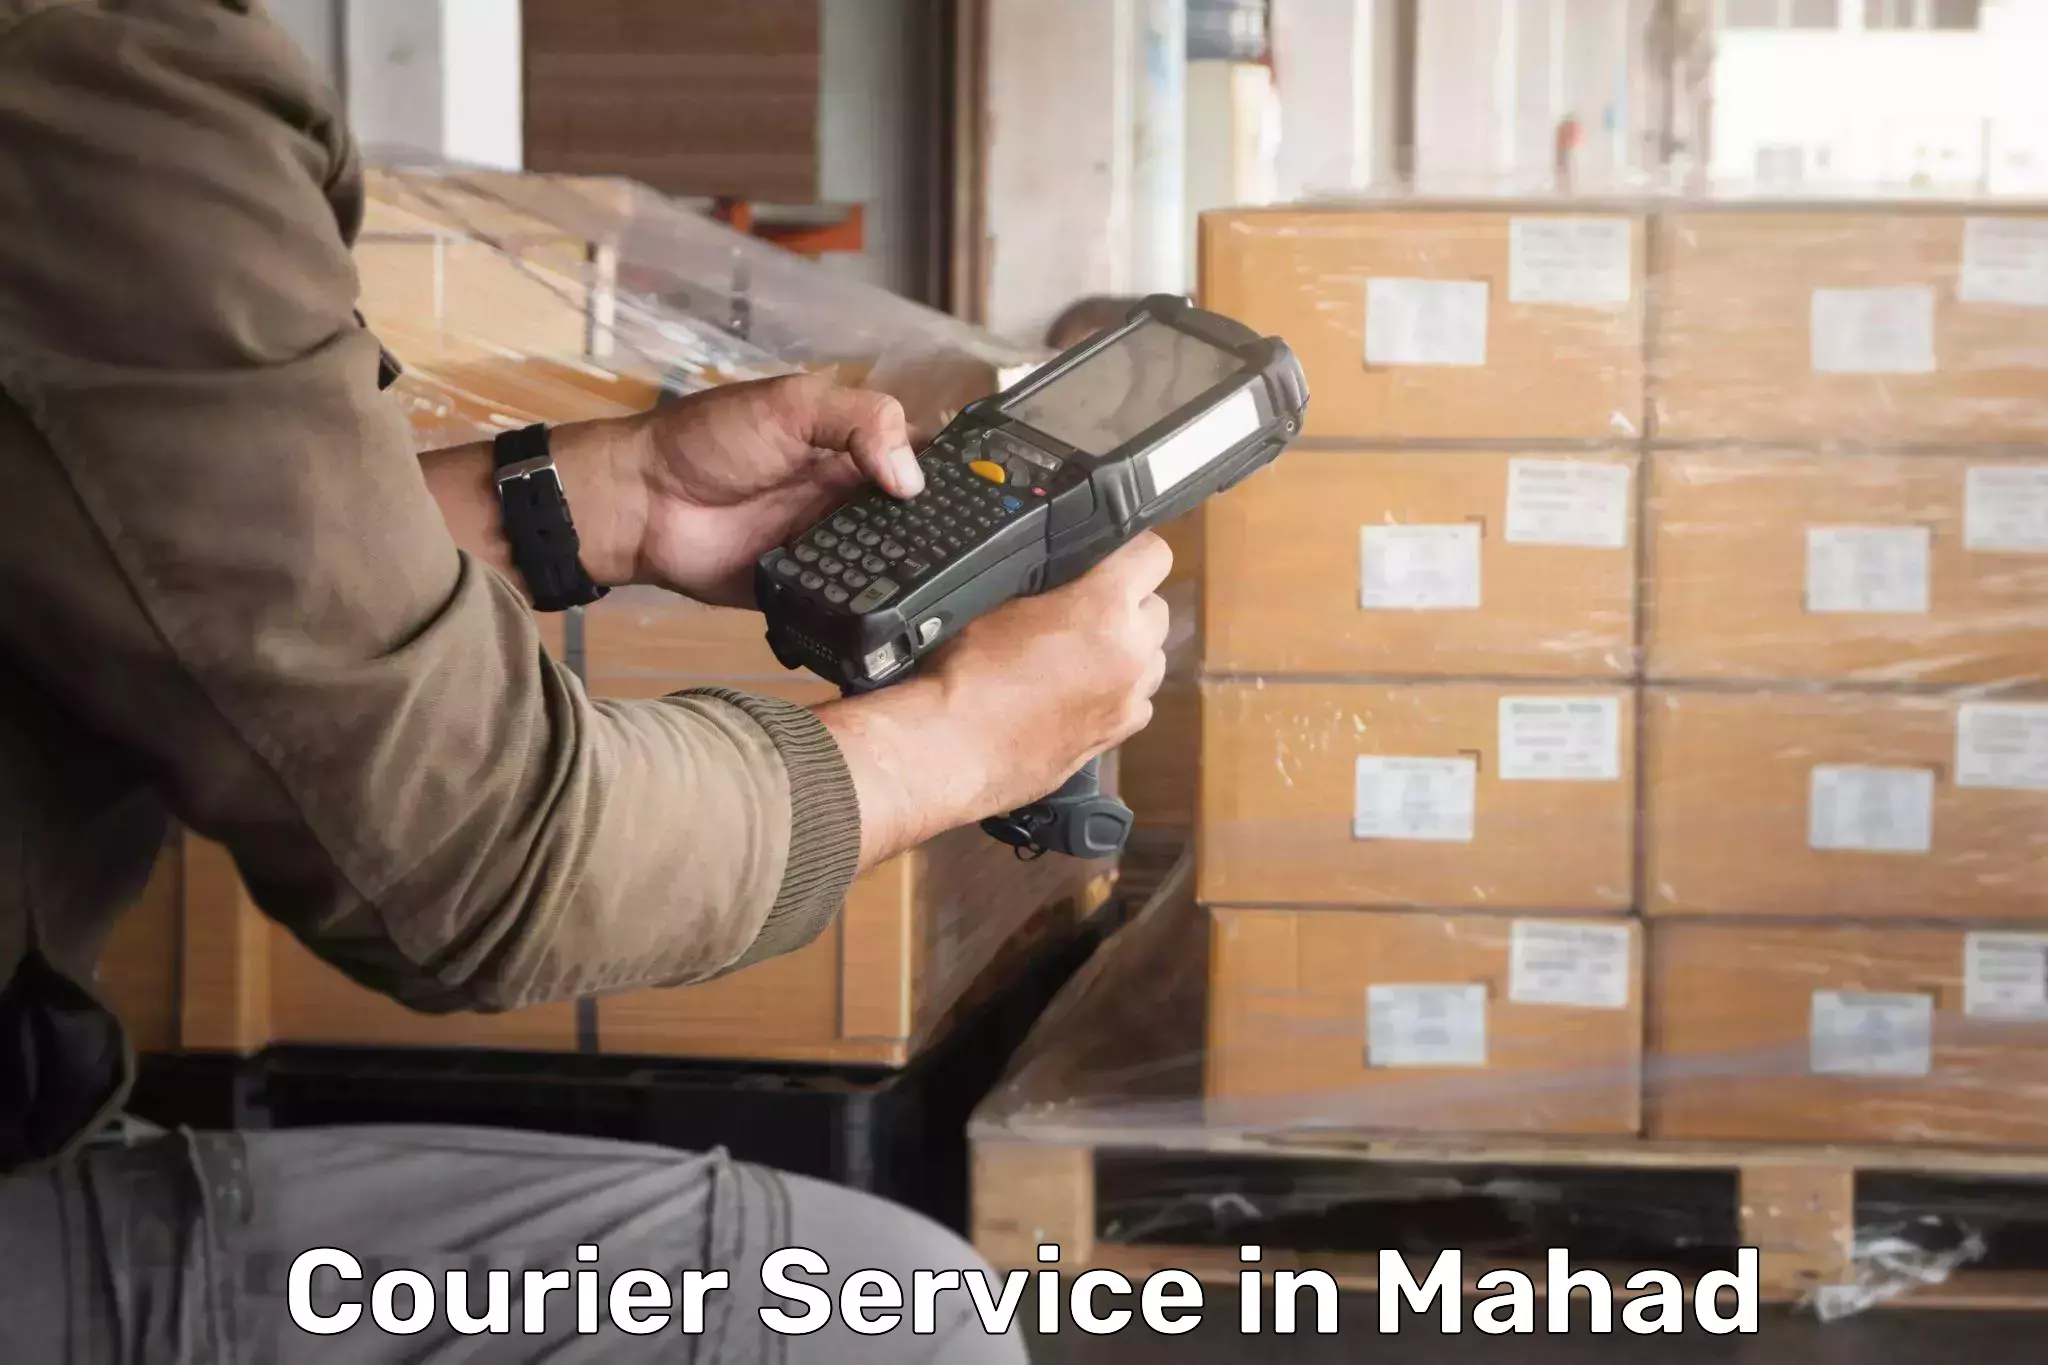 Specialized shipment handling in Mahad